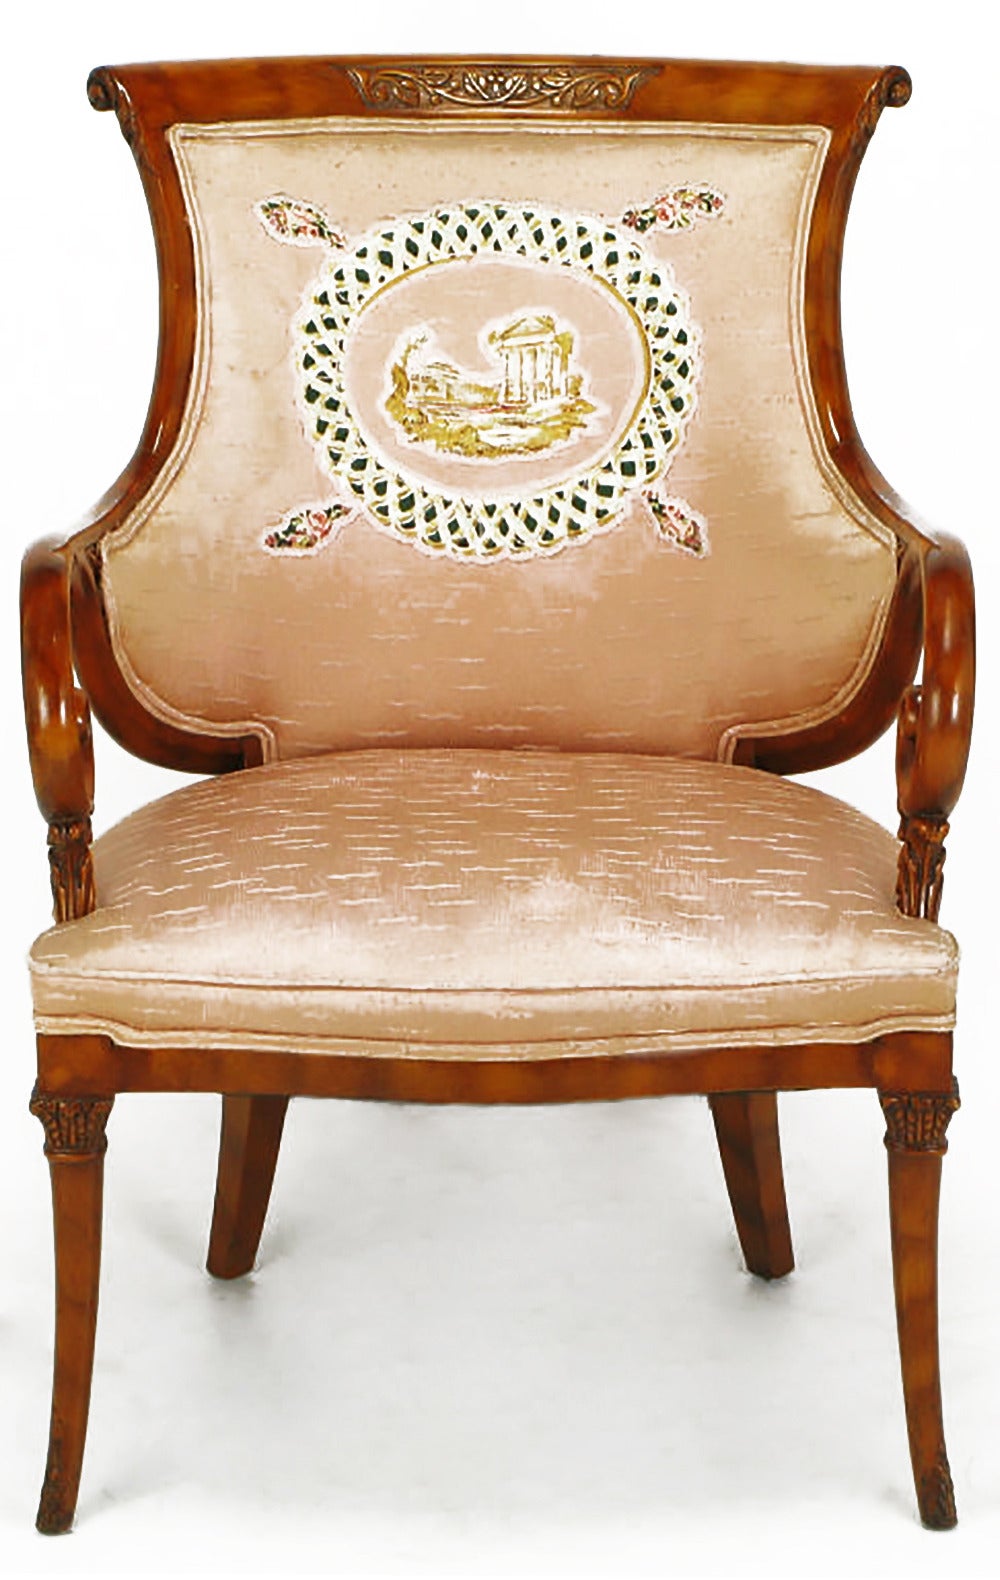 Expertly carved walnut Italian Regency armchair with pink textured silk upholstery. The back is curved, with quilted appliques depicting a Classic Roman-Greco temple. Acanthus leaf ornamentation.